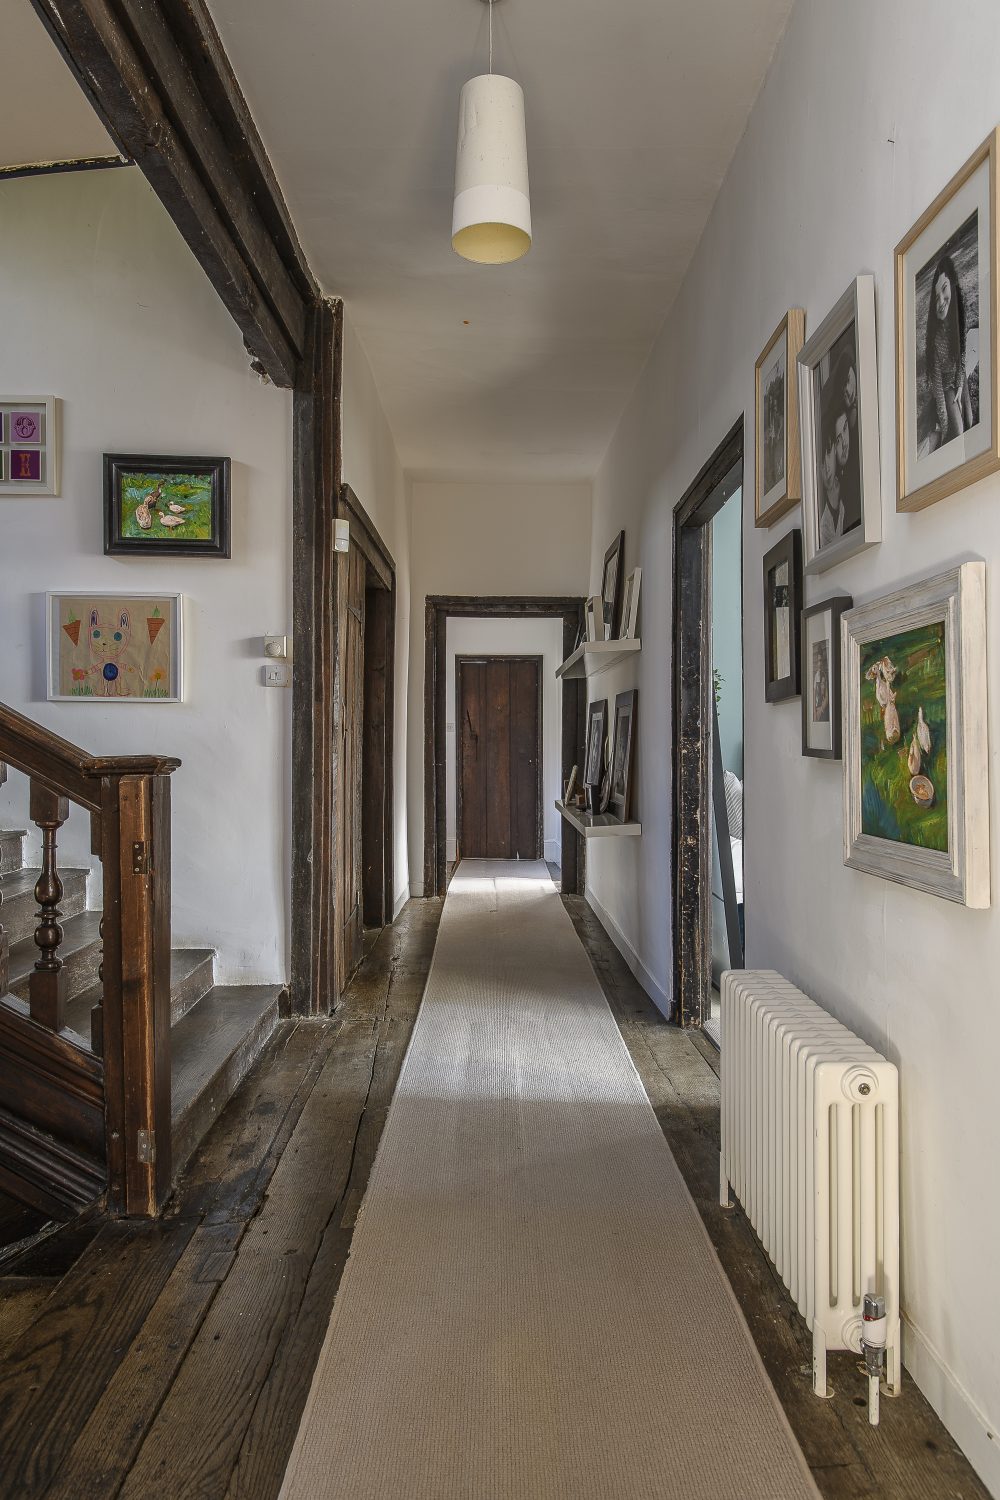 On the first floor, several large bedrooms and a family bathroom are accessed via a long corridor